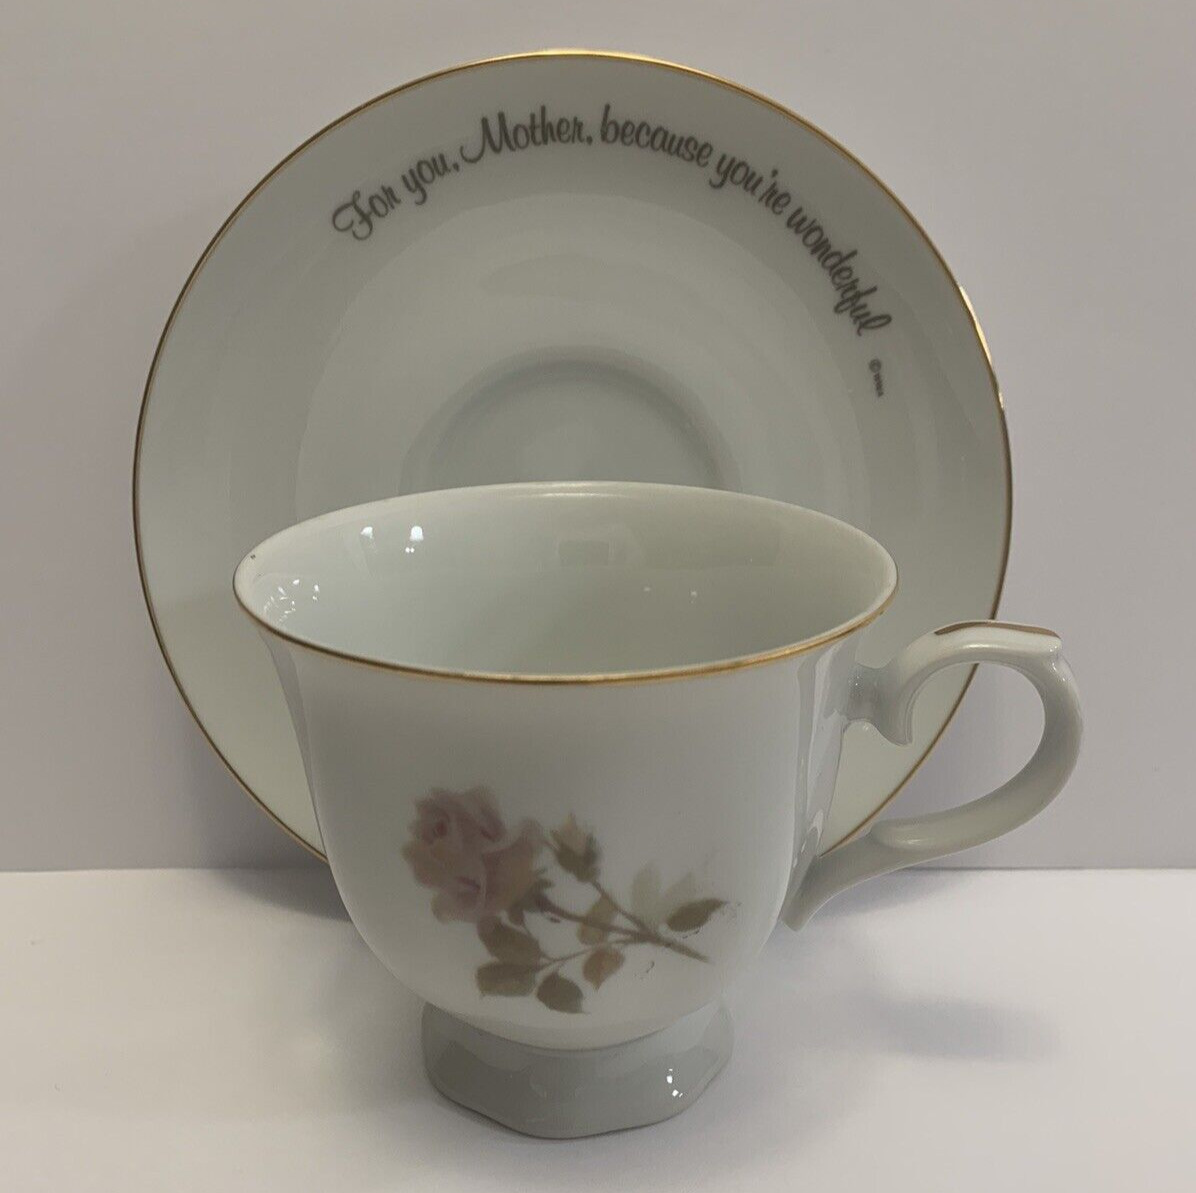 A Mothers Remembrance Porcelain Tea Coffee Cup Saucer Rose Designers Collection